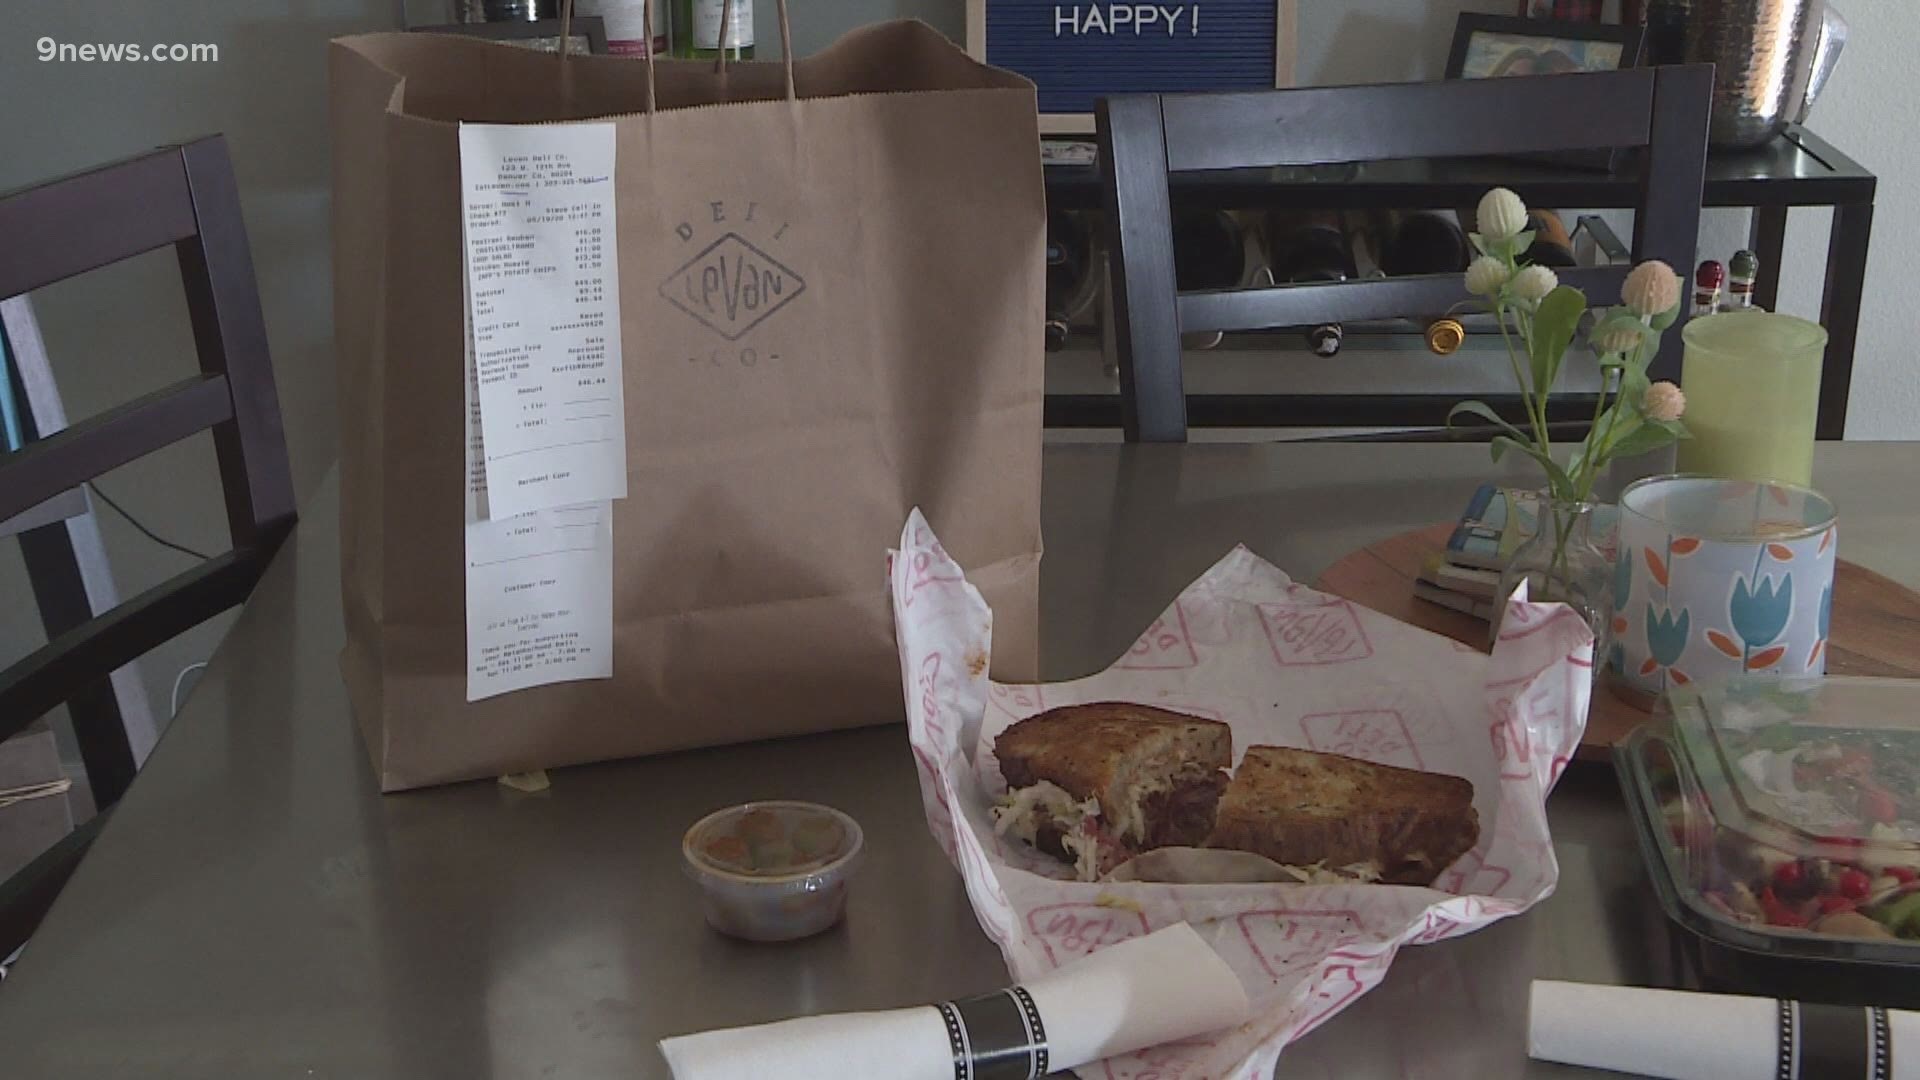 Denver's City Council approved an ordinance requiring businesses to ask before sending utensils with takeout orders.